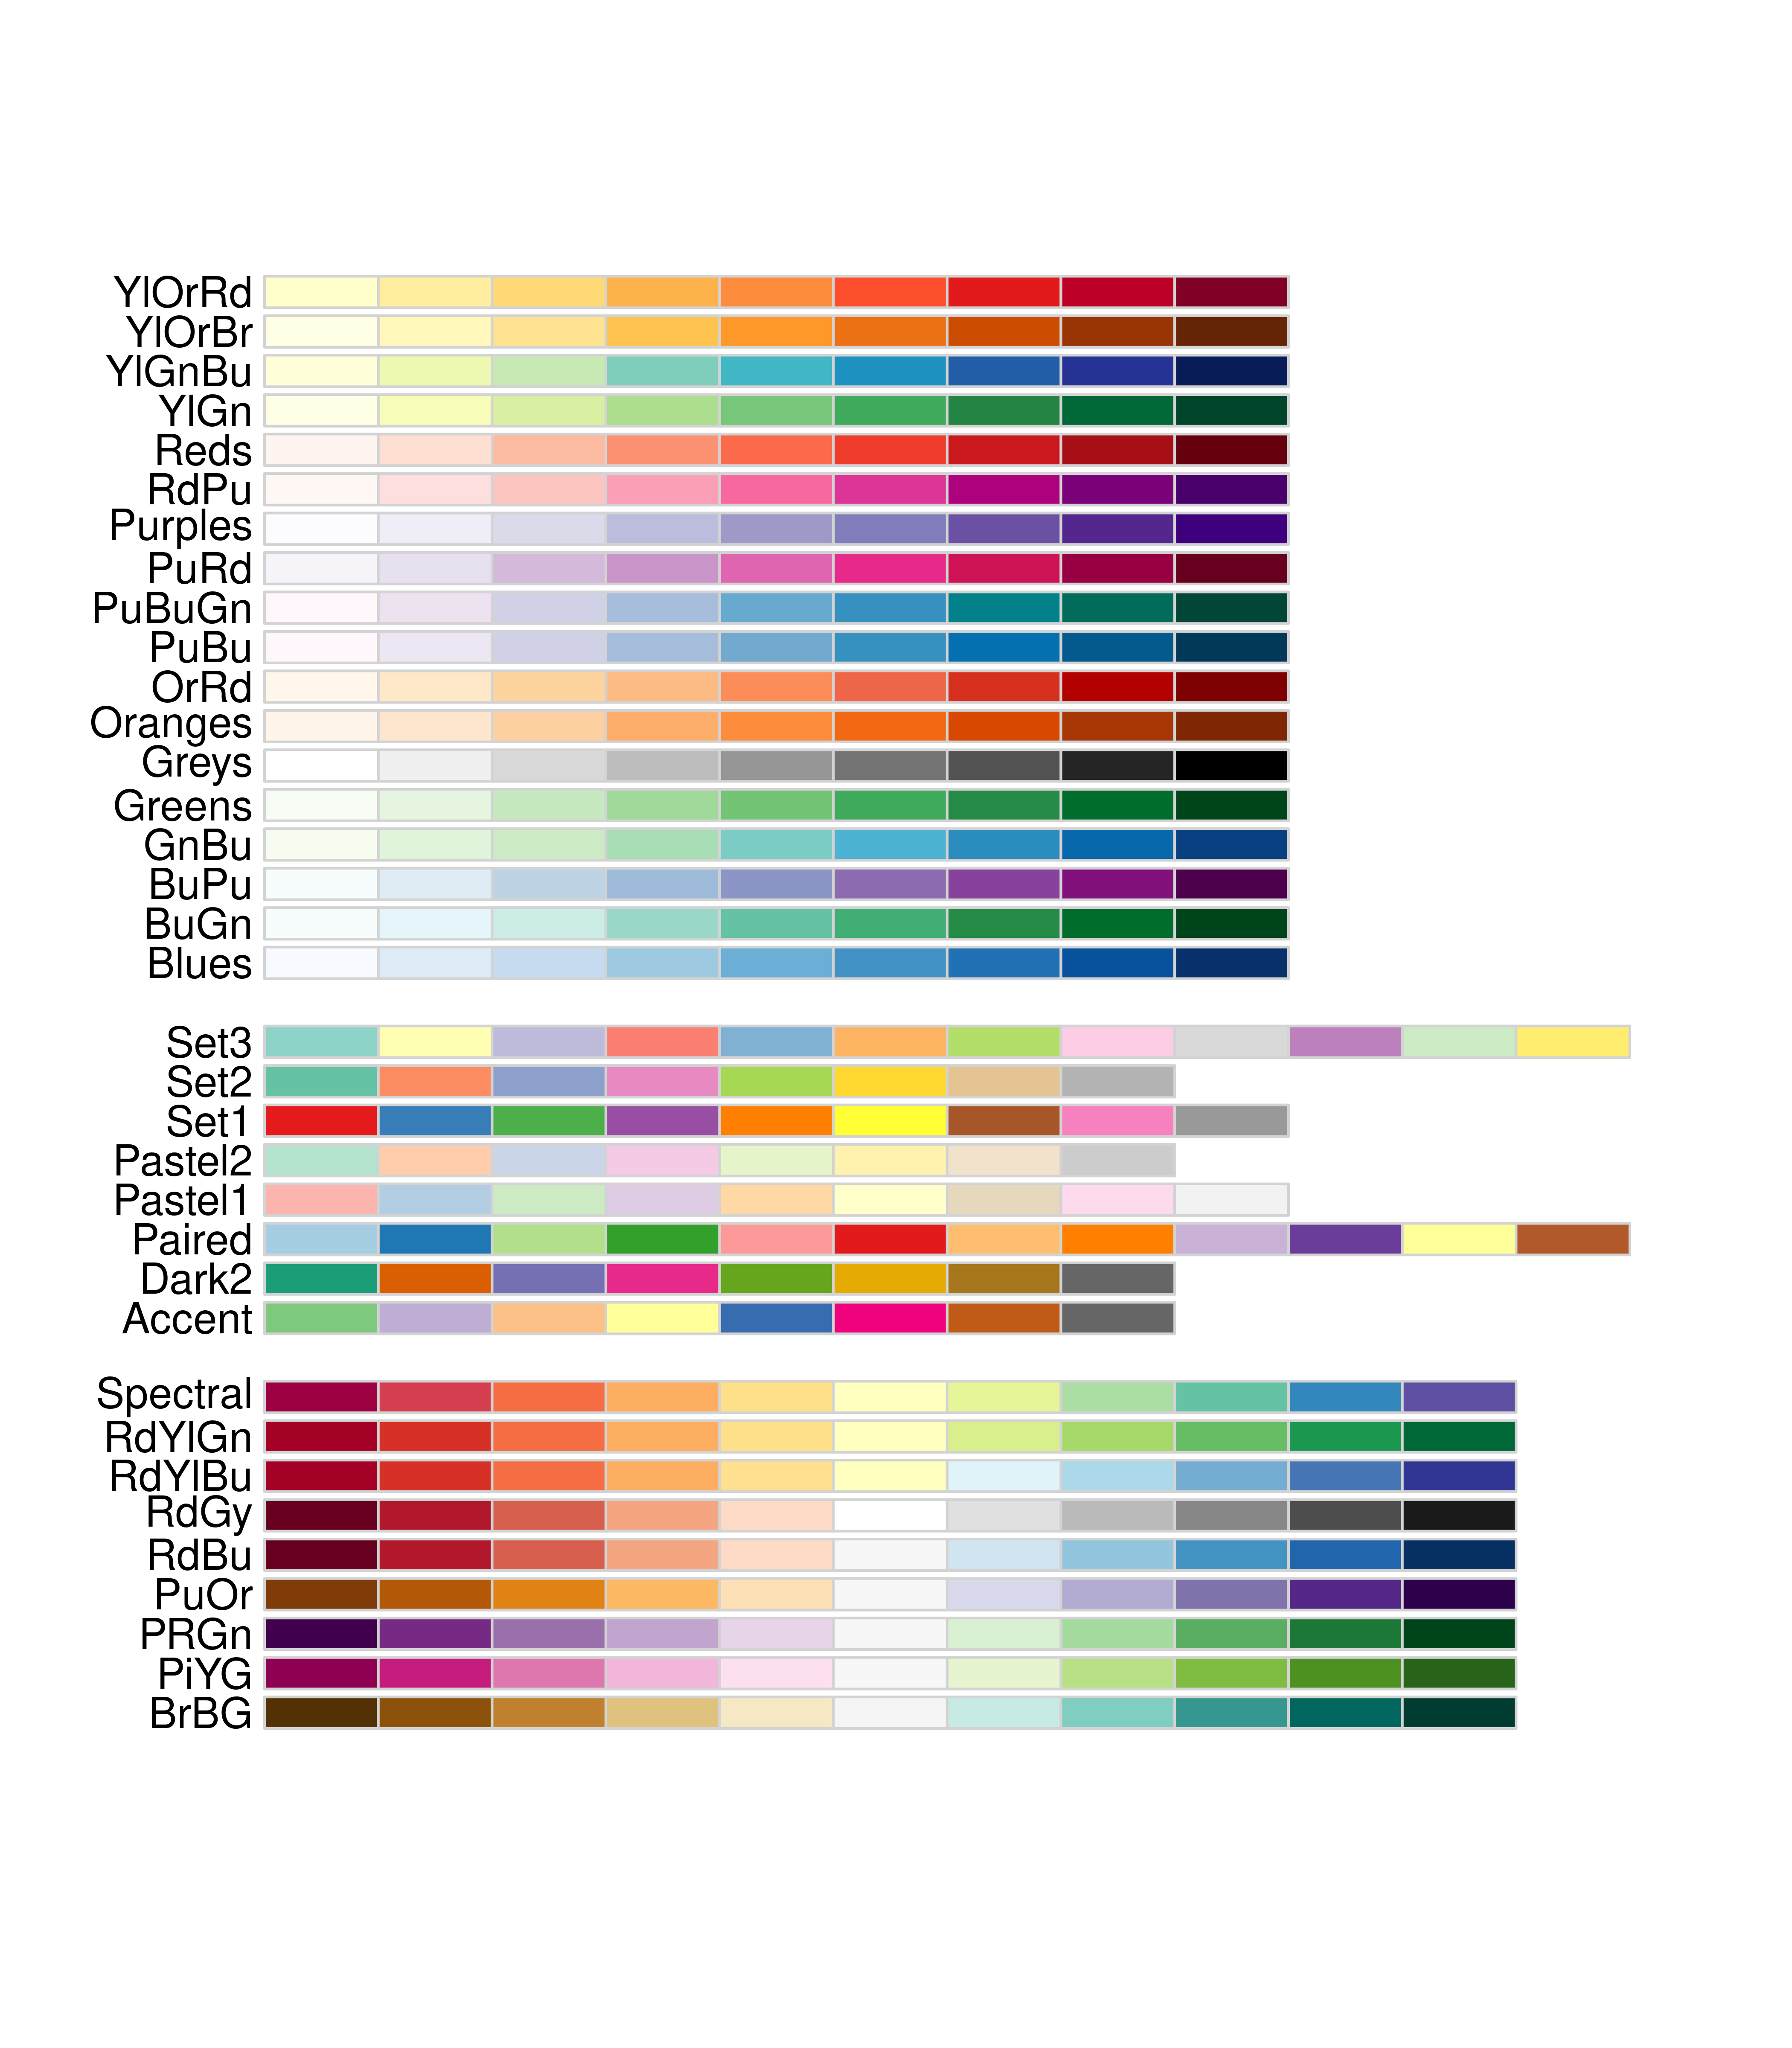 https://ggplot2-book.org/scales-colour_files/figure-html/unnamed-chunk-23-1.png